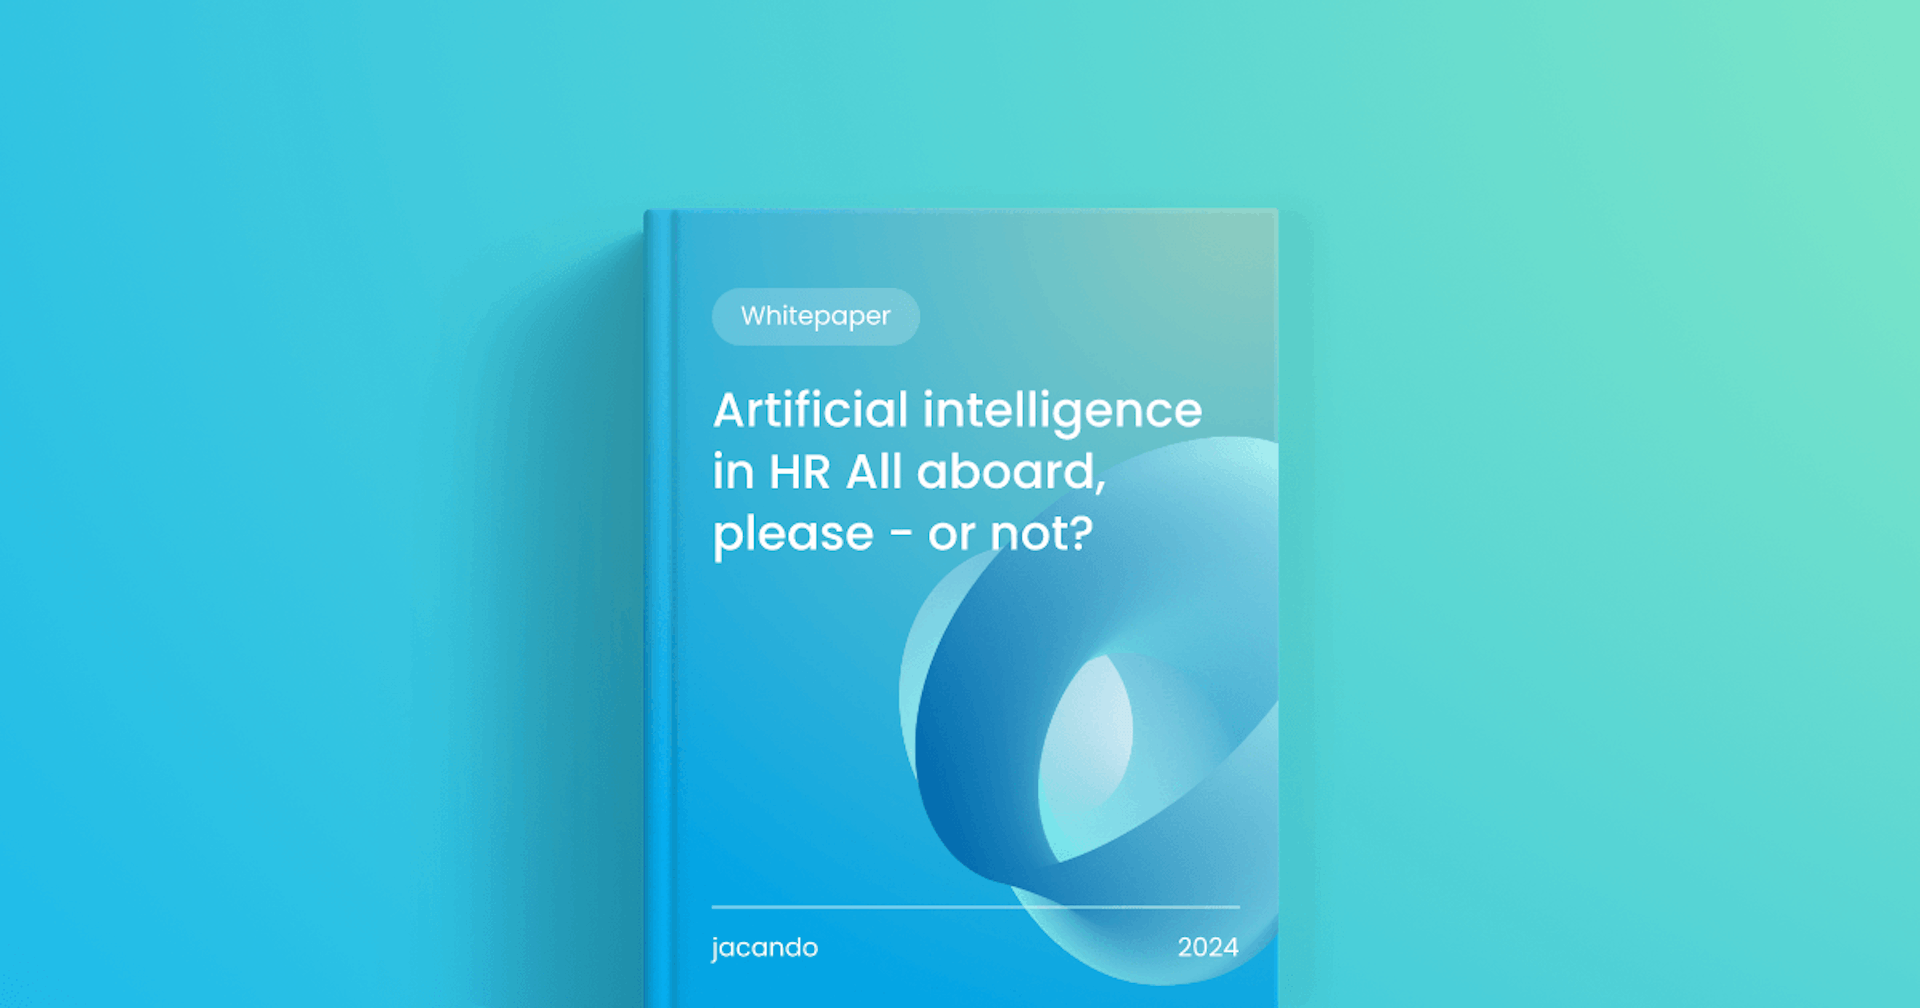 Artificial intelligence in HR All aboard, please - or not?